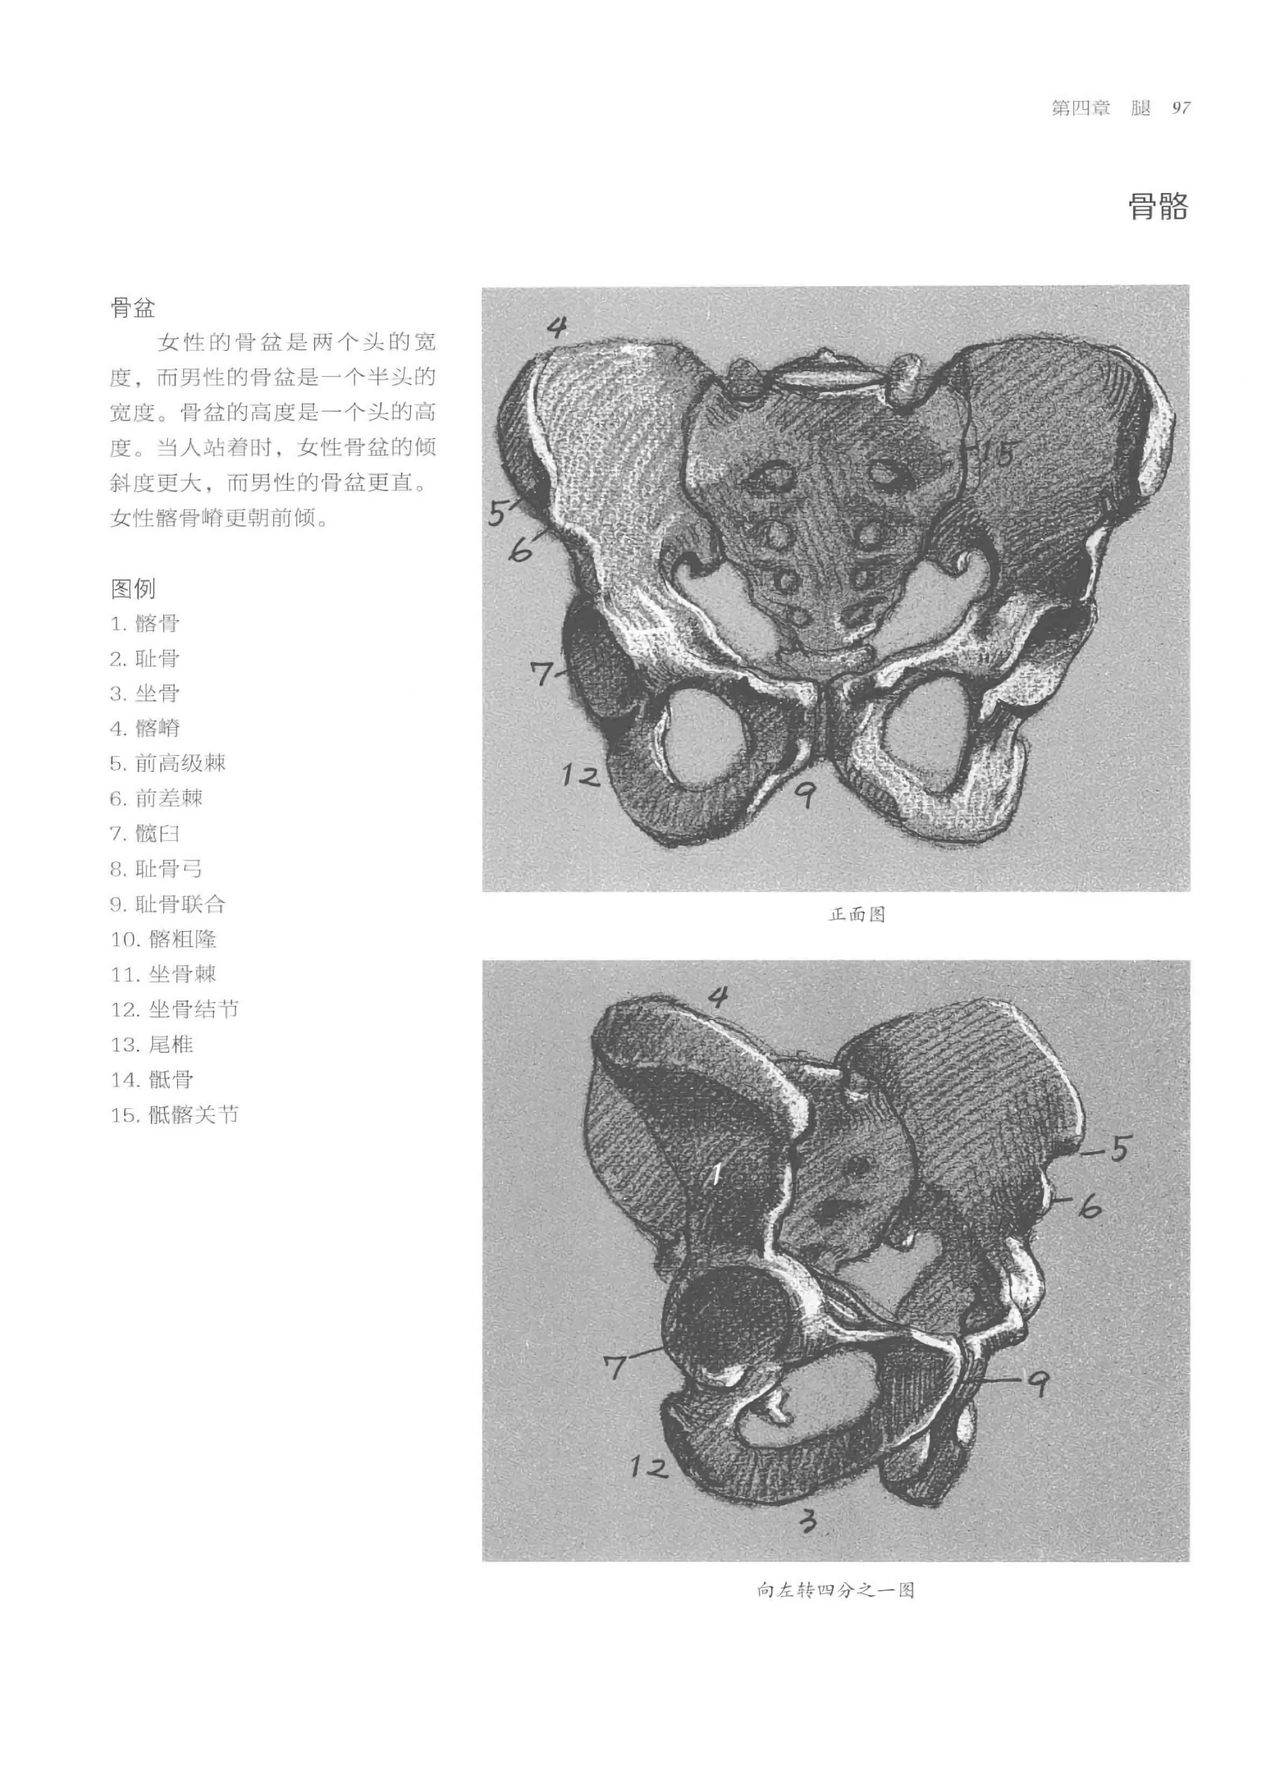 Anatomy-A Complete Guide for Artists - Joseph Sheppard [Chinese] 97